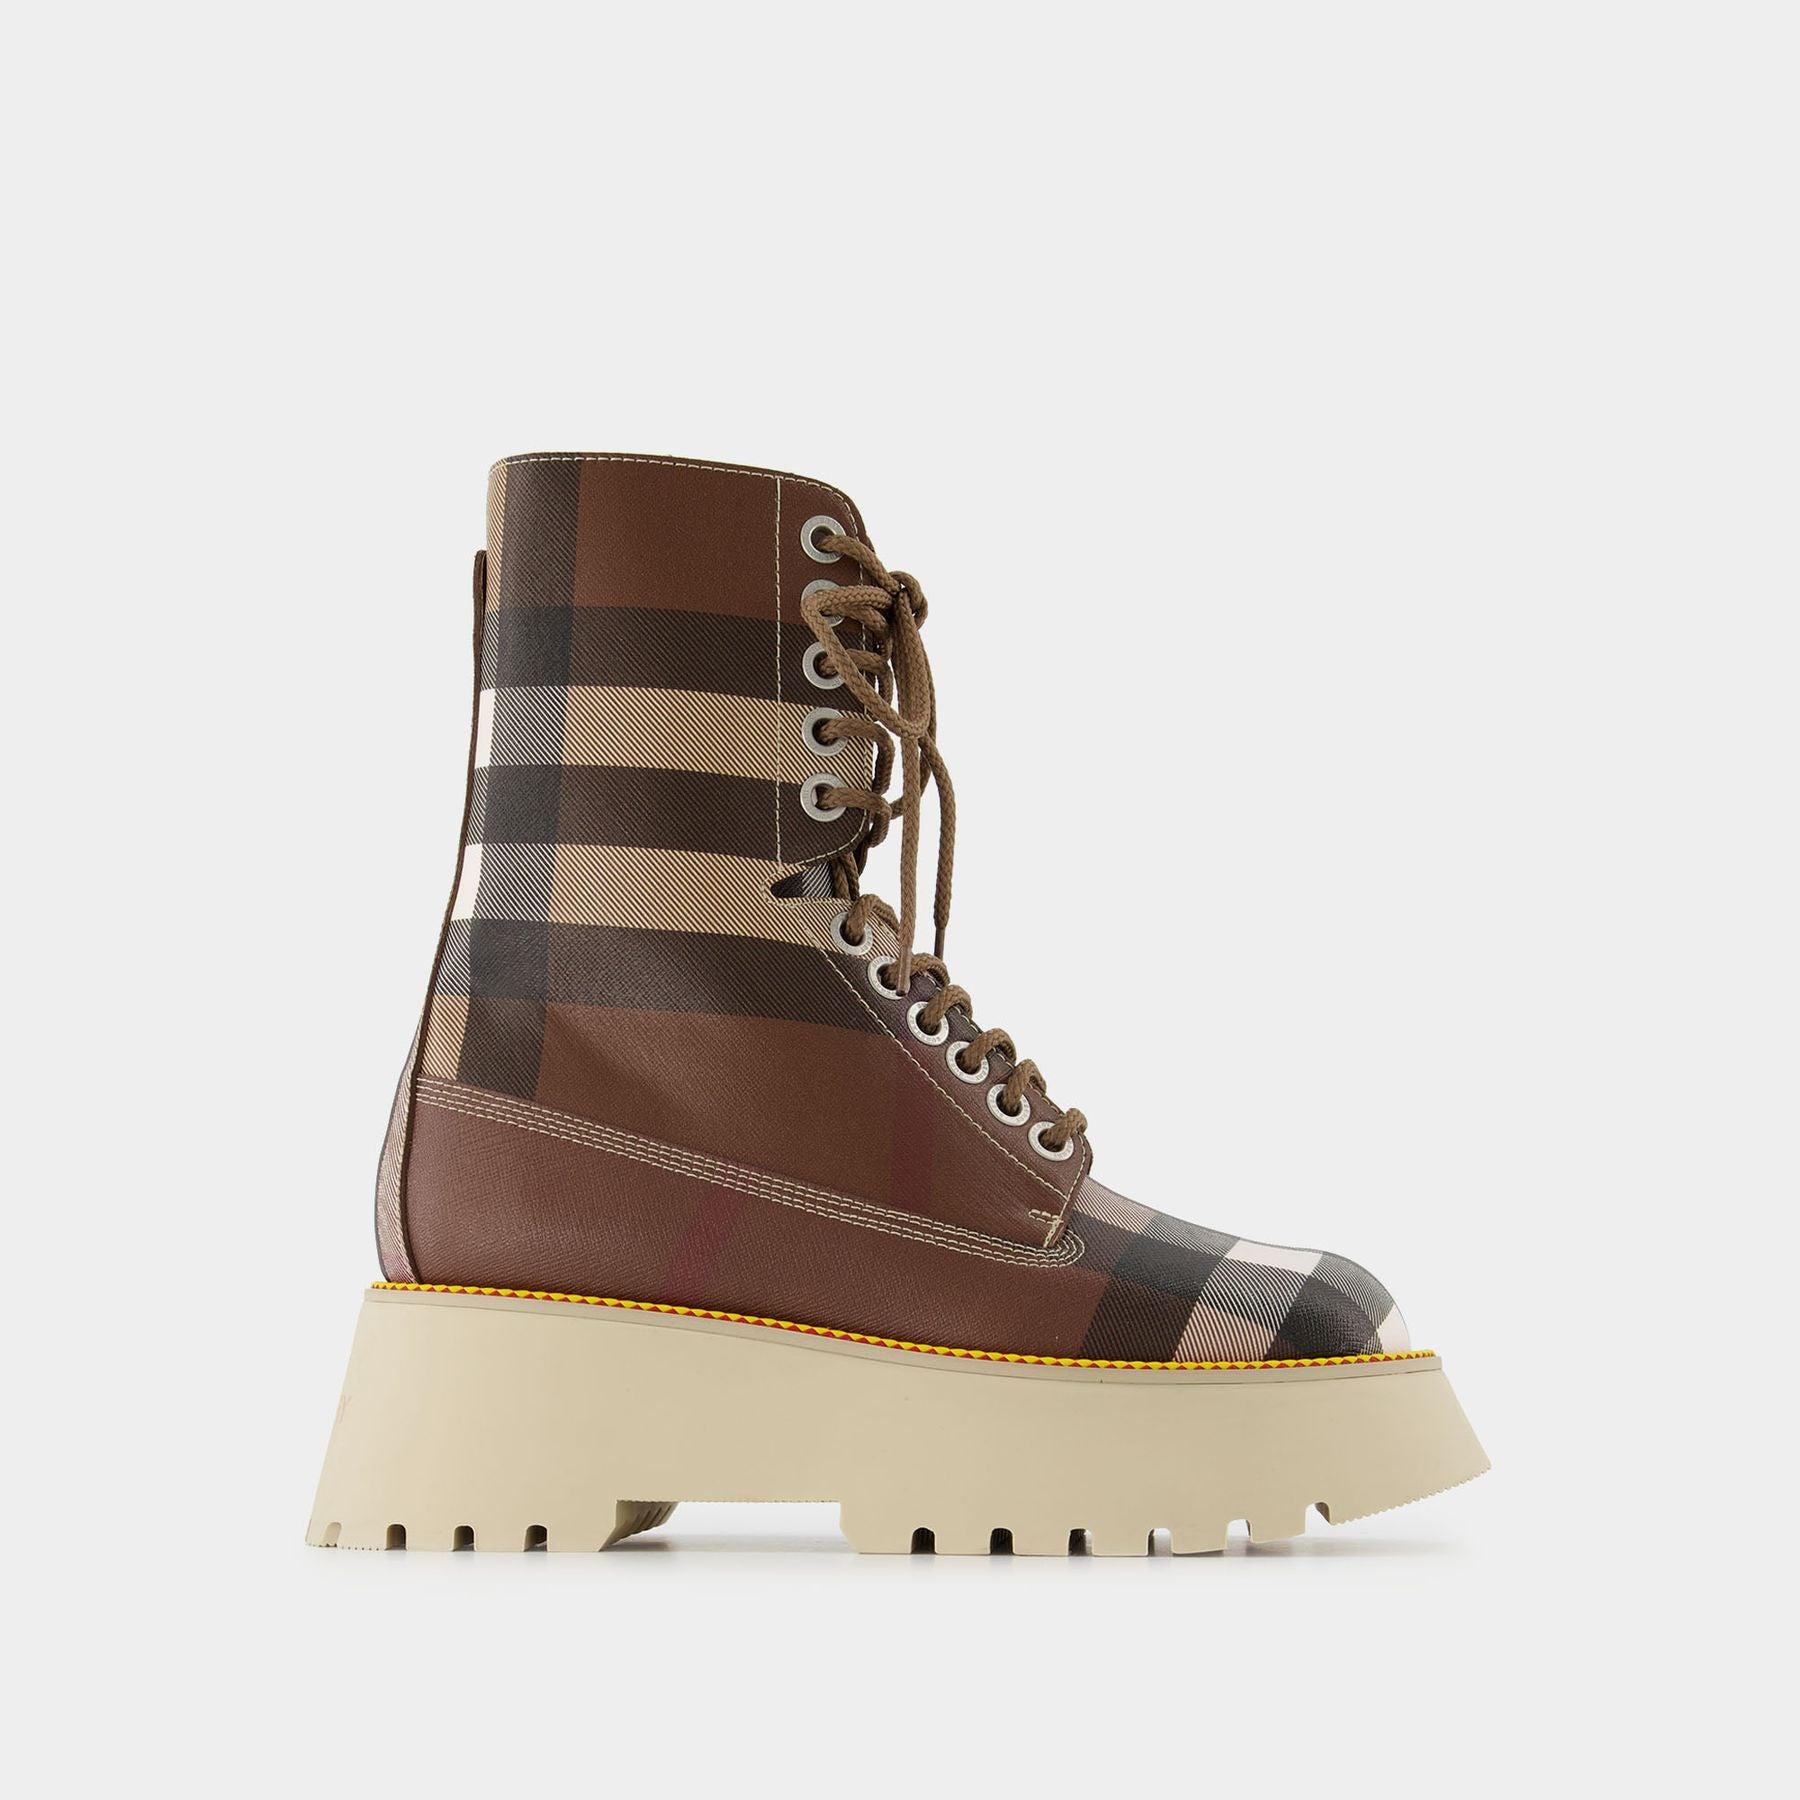 Burberry Exaggerated Check Leatherette Platform Boots in Brown | Lyst